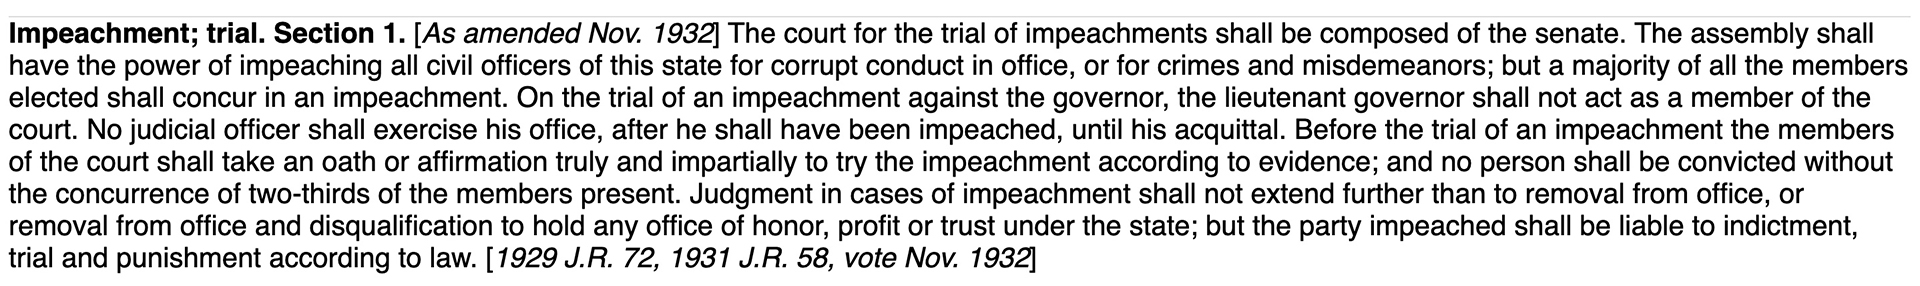 A screenshot shows text that begins with bold text that reads "Impeachment; trial. Section 1."